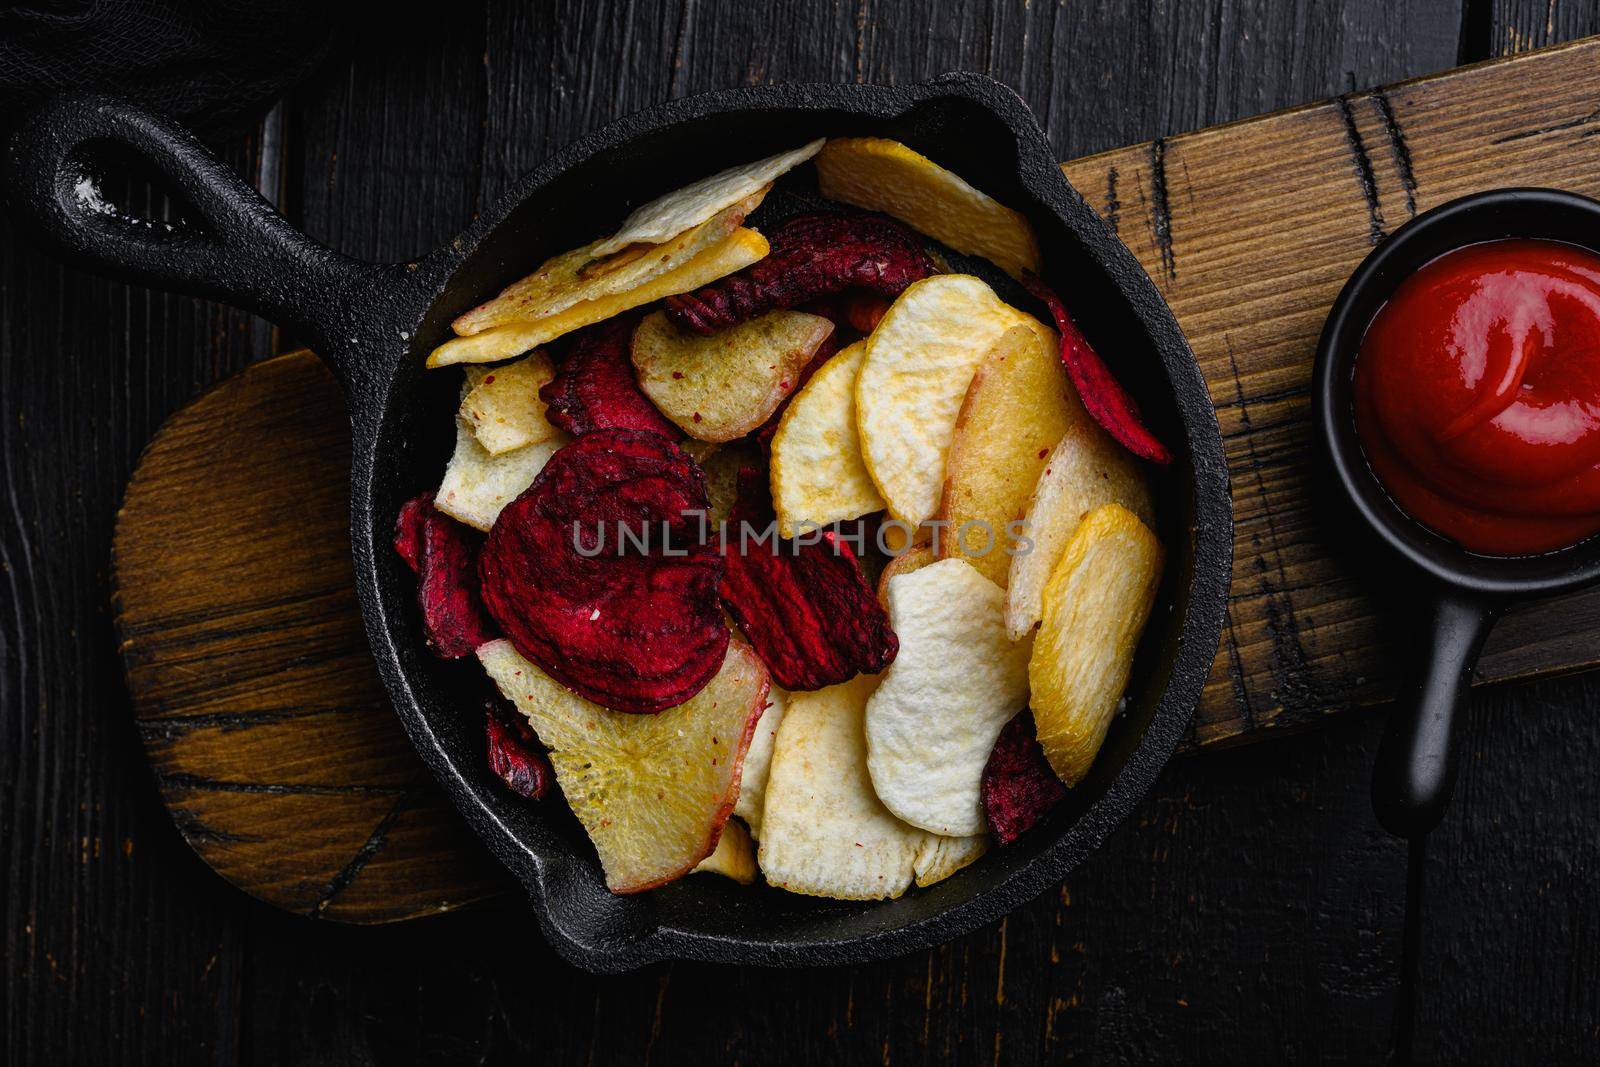 Dried vegetables chips from carrot, beet, parsnip and other vegetables, on black wooden table background, top view flat lay by Ilianesolenyi